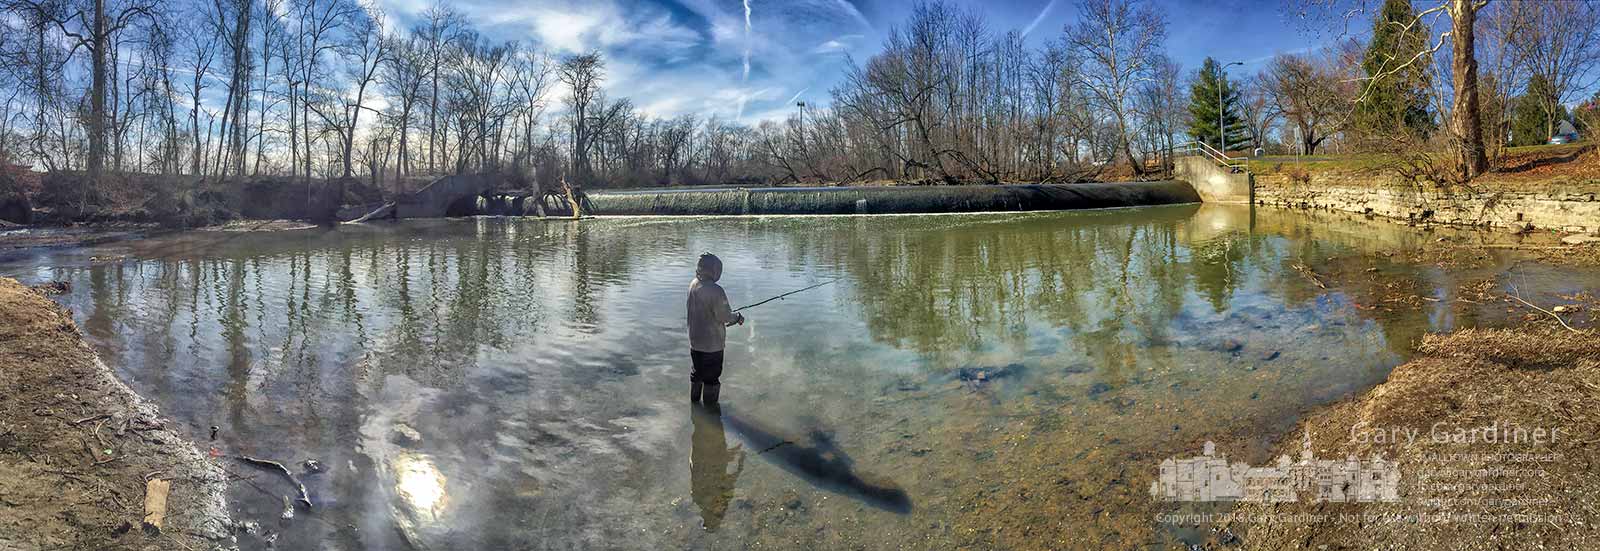 A 12-year-old angler casts into the waters below the Alum Creek North Dam on Sunday afternoon completing a weekend of fishing and no fish. My Final Photo for March 25, 2018. (EyePush NewsPhoto/Gary Gardiner)